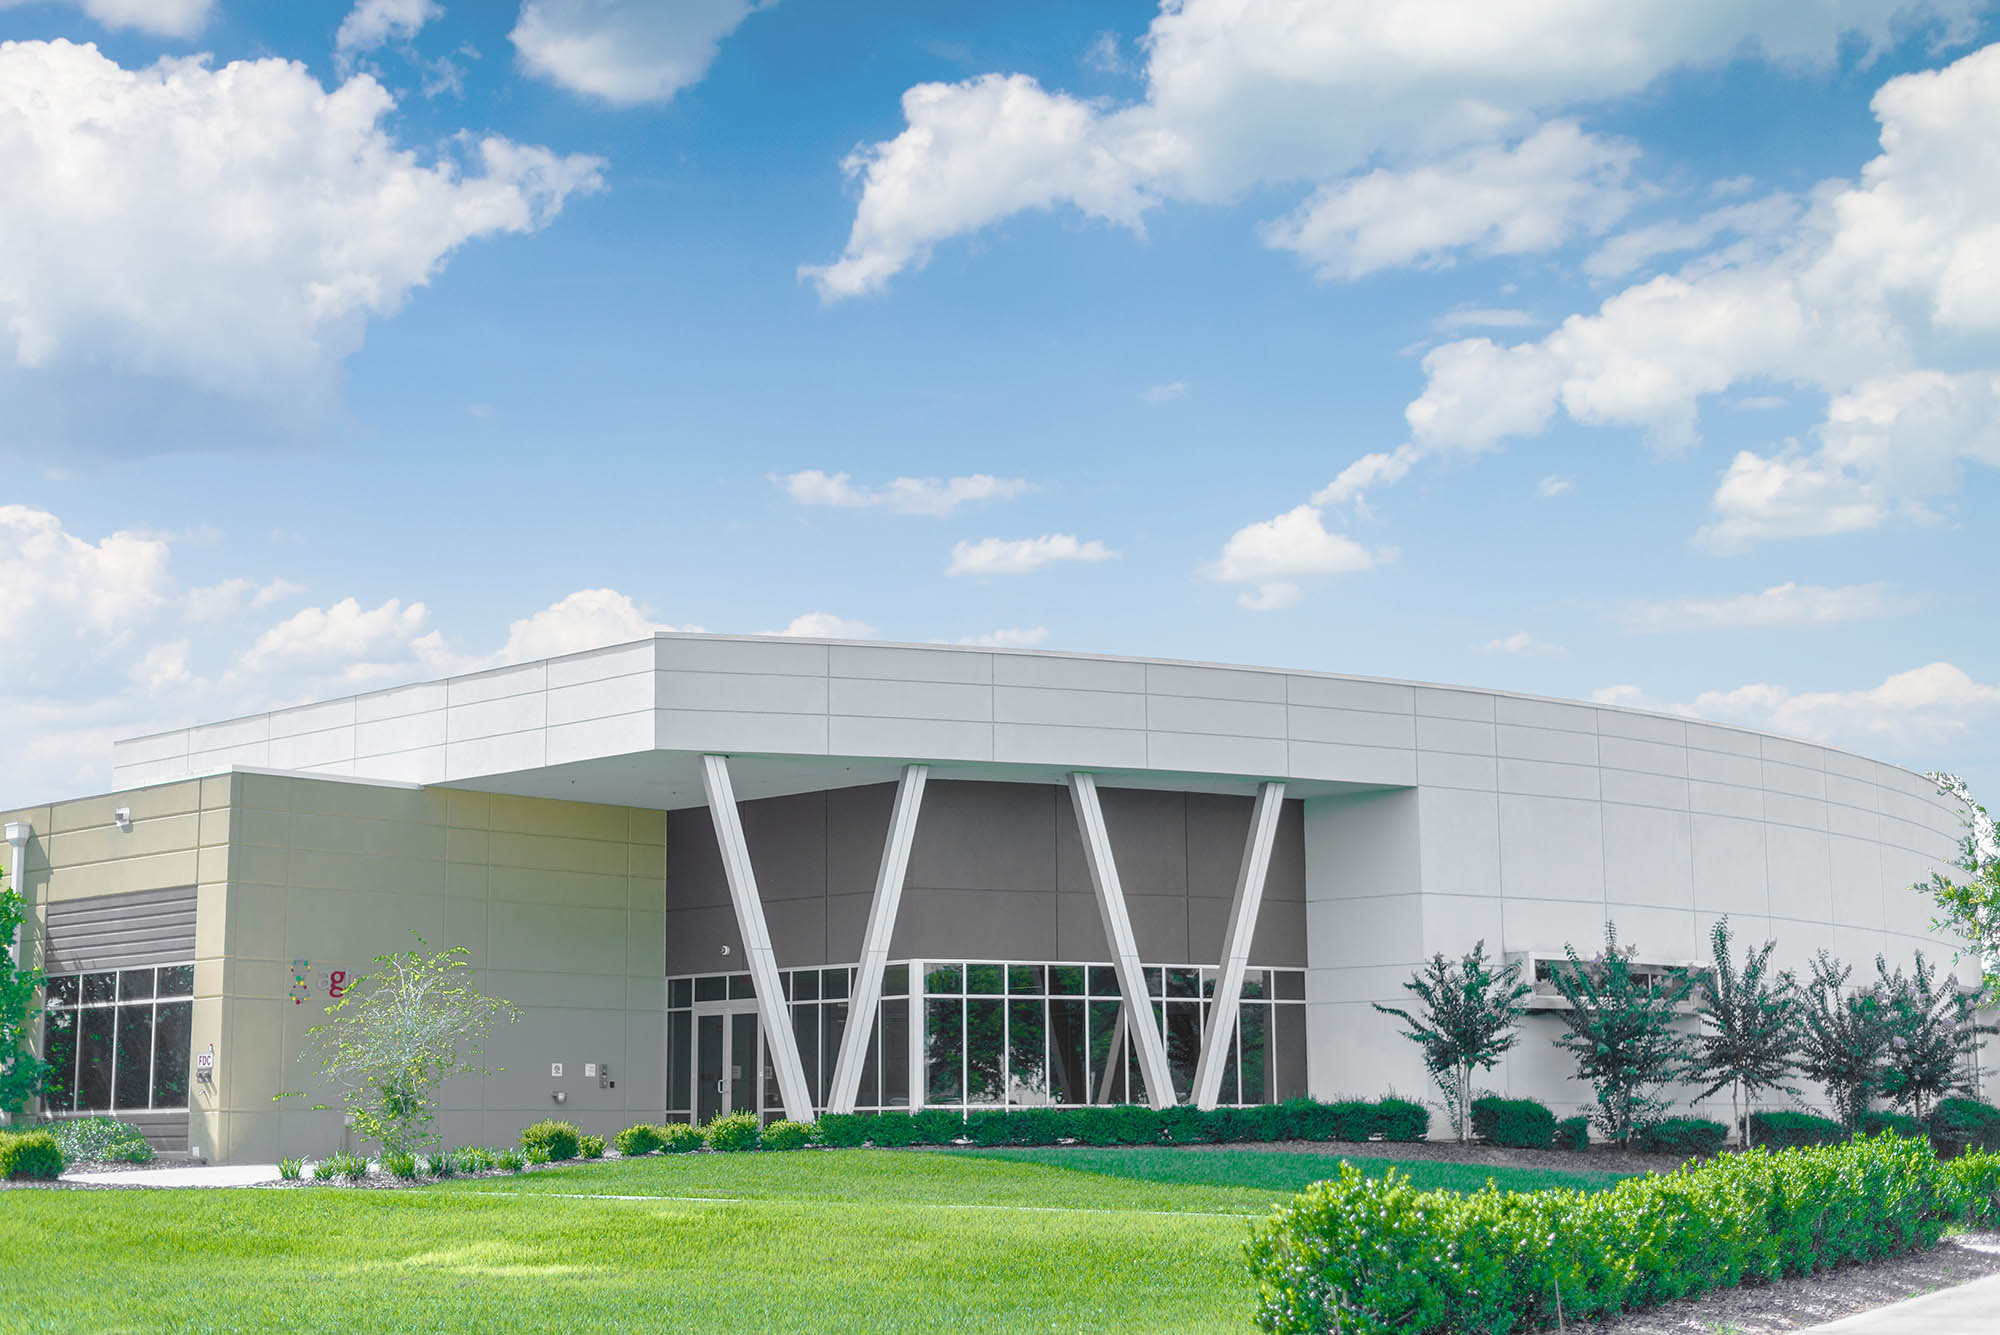 Avison Young completes sale of Biotech Research Facility in Florida’s Gainesville market